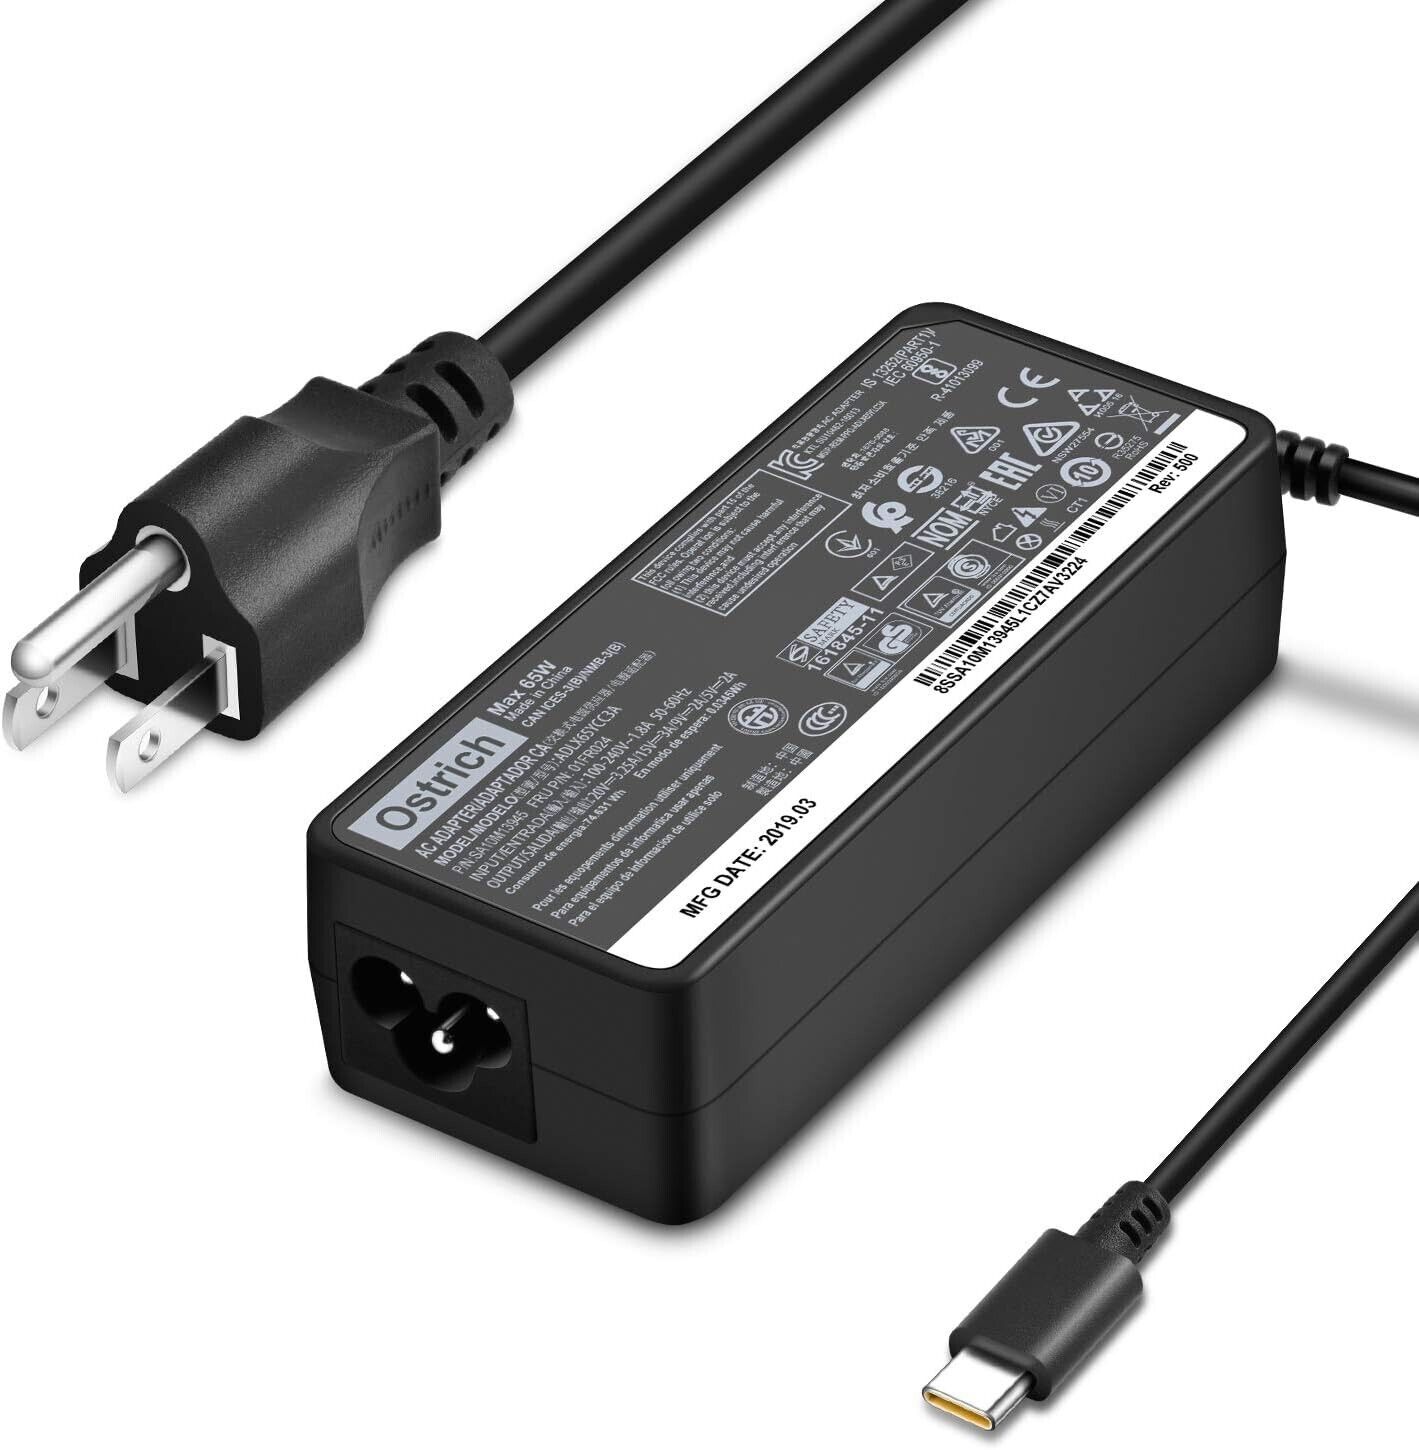 🔥Ostrich 65W ADLX65YCC3A for Lenovo Laptop Computer USB C Fast Power Adapter🔥